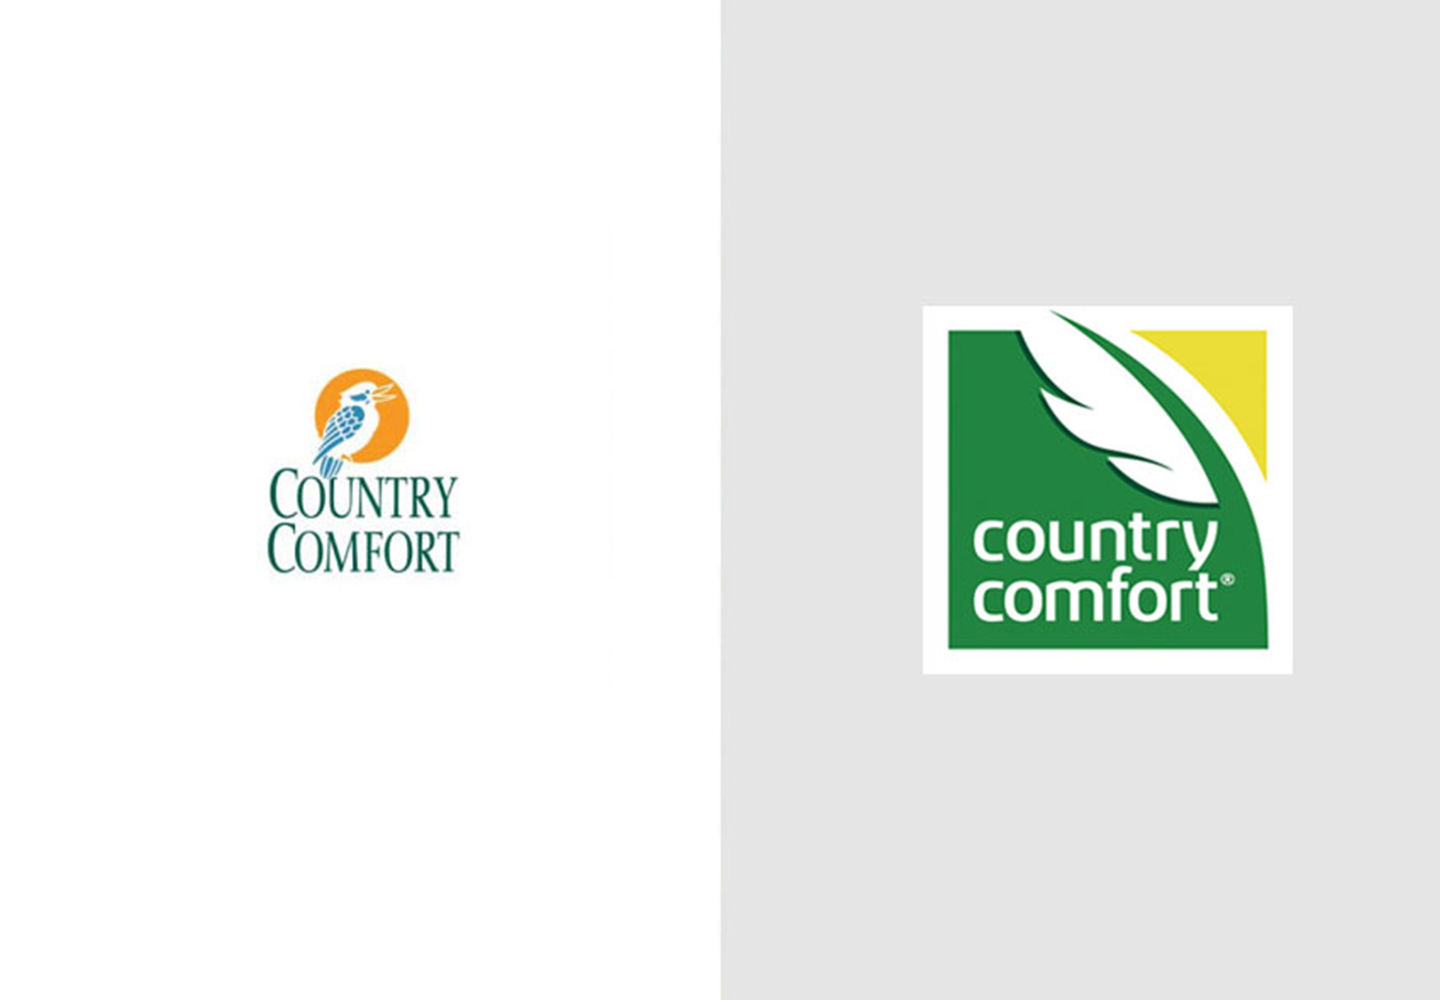 Brand Consultancy in Hospitality Industry. Logo design for Country Comfort.